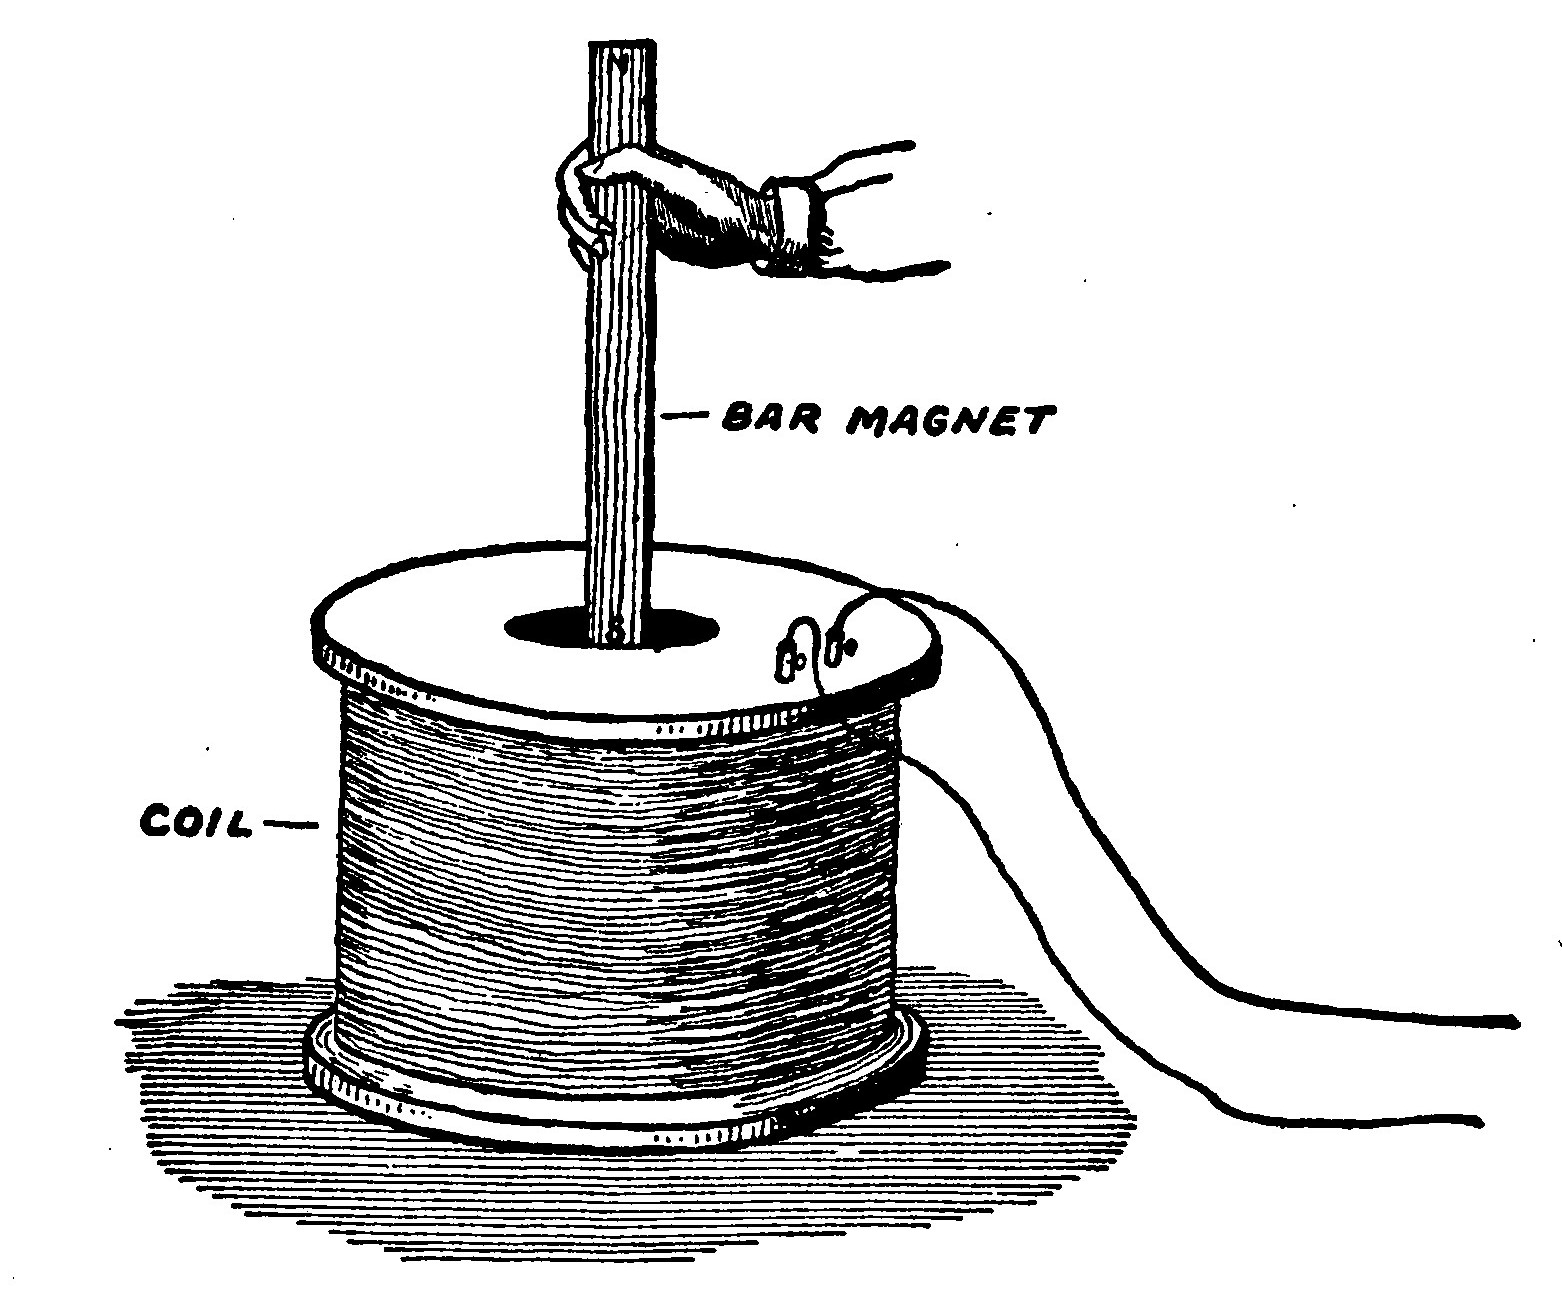 Fig. 86.—Showing how a Current of Electricity may be induced by a Bar Magnet and a Coil.